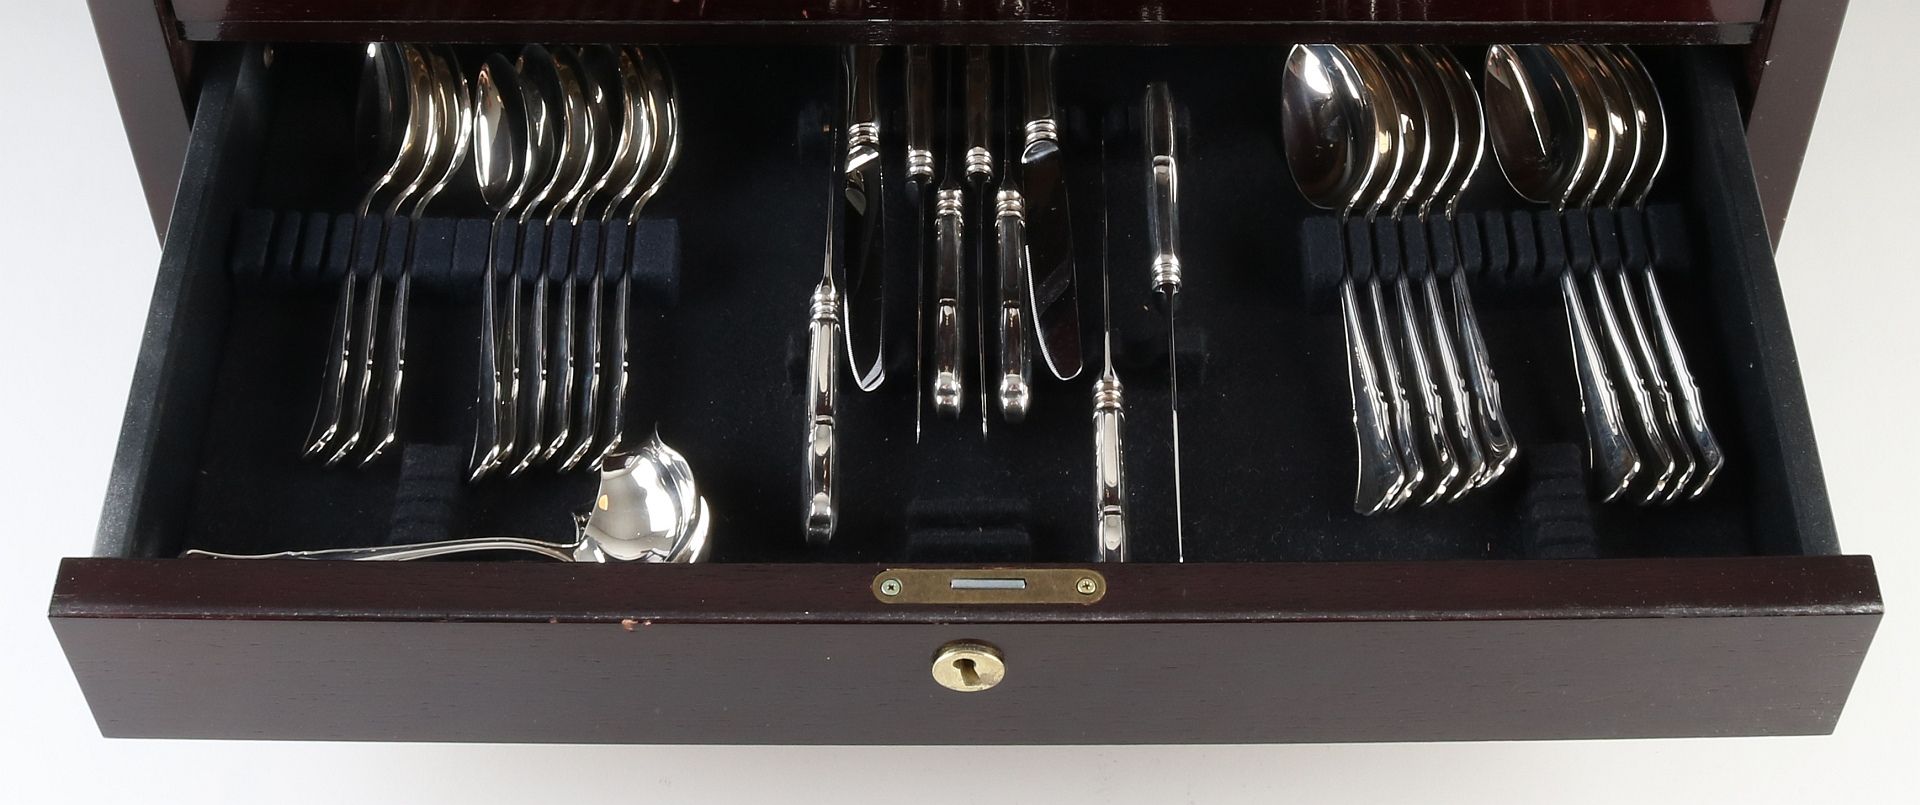 Silver cutlery cassette Robbe & Berking - Image 3 of 4